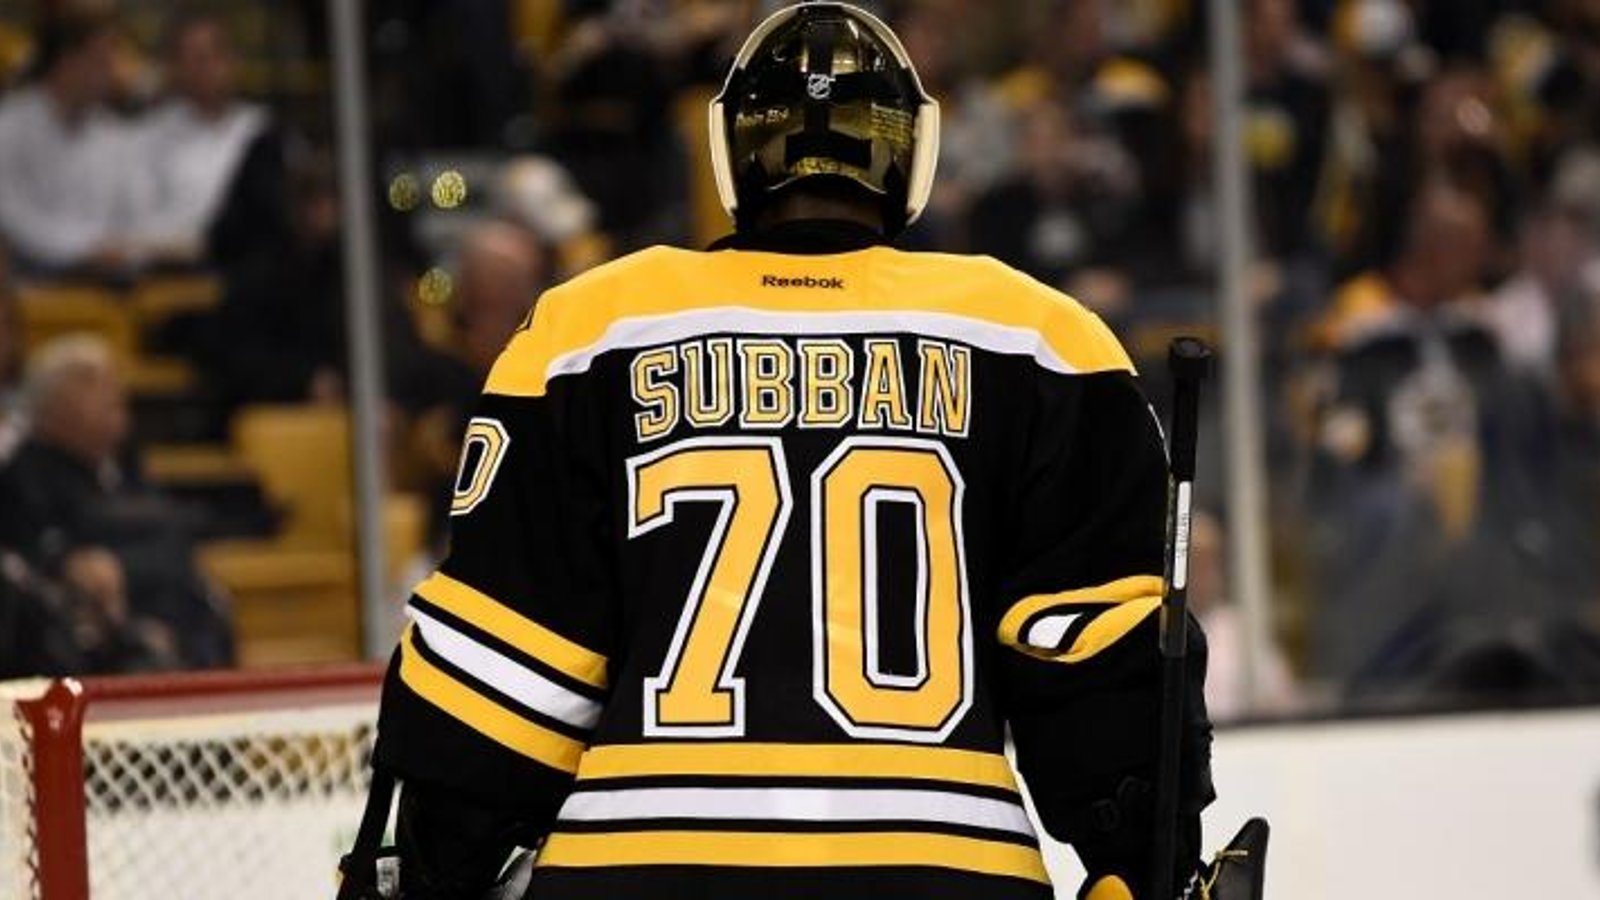 Injury to Subban revealed to be very serious, out for significant time.